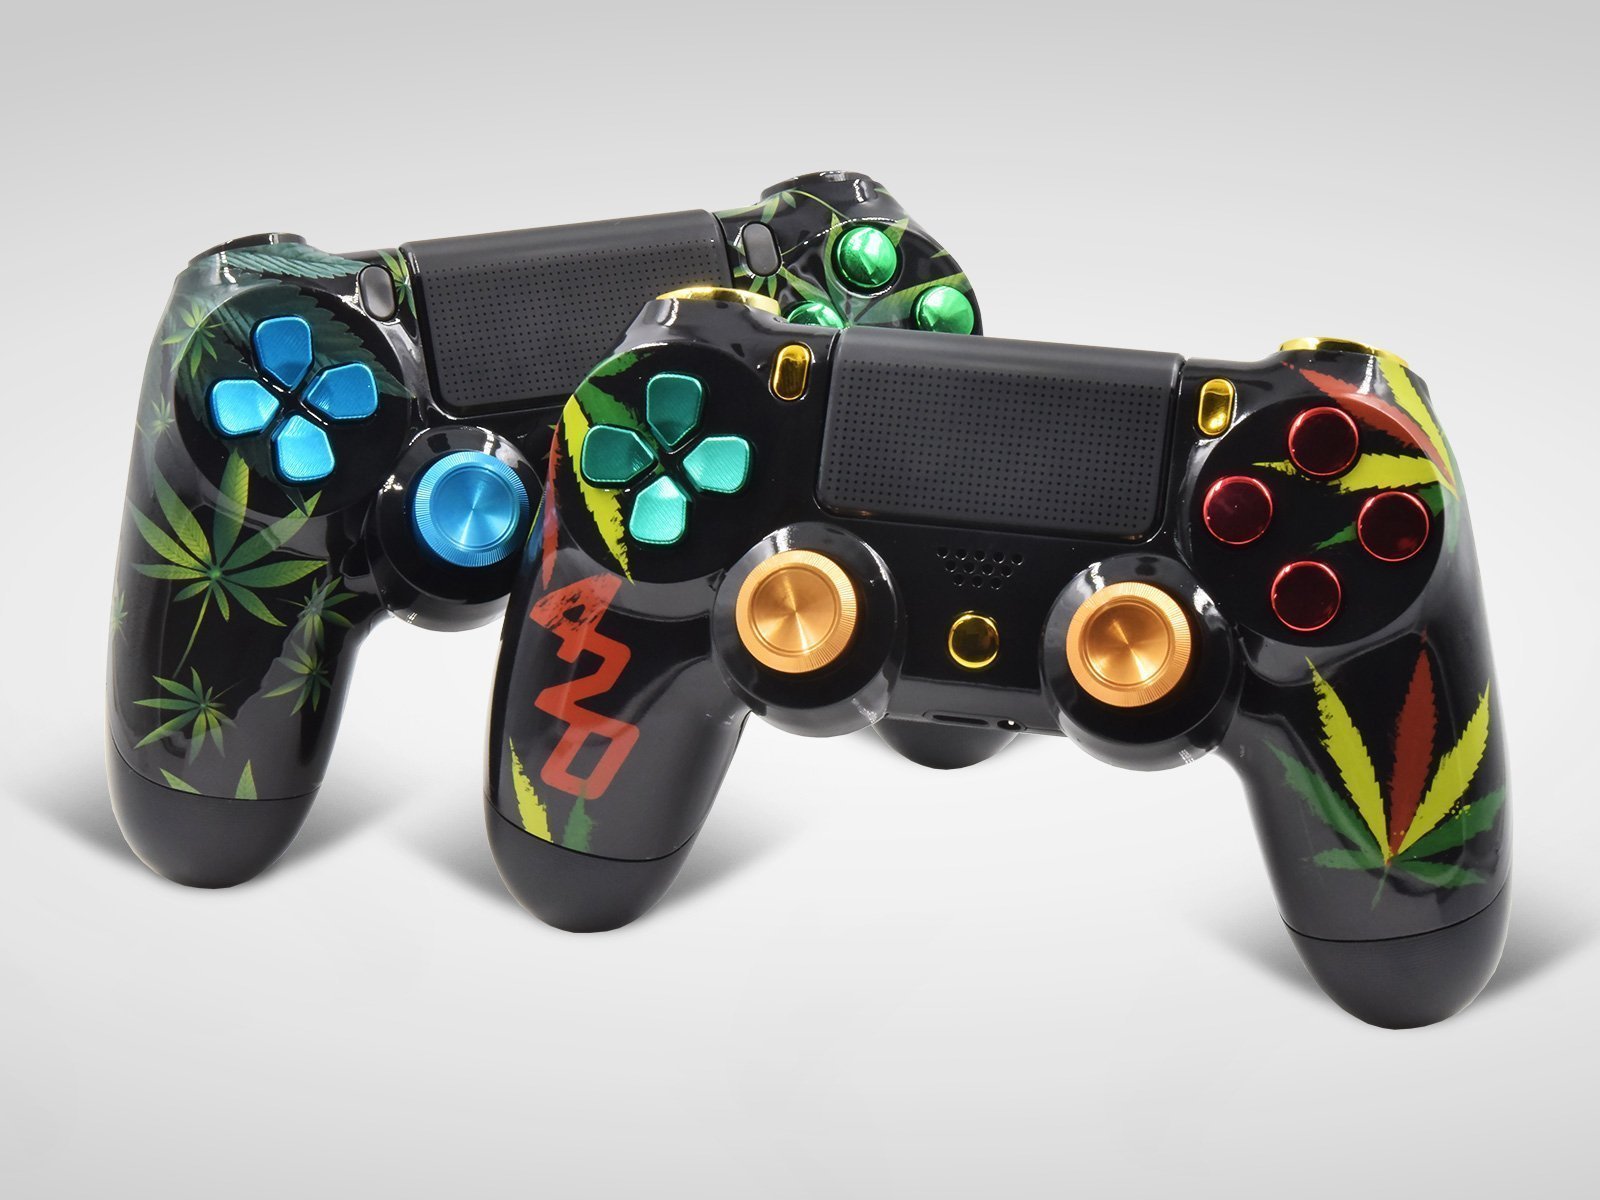 PS4 Limited Edition Controllers